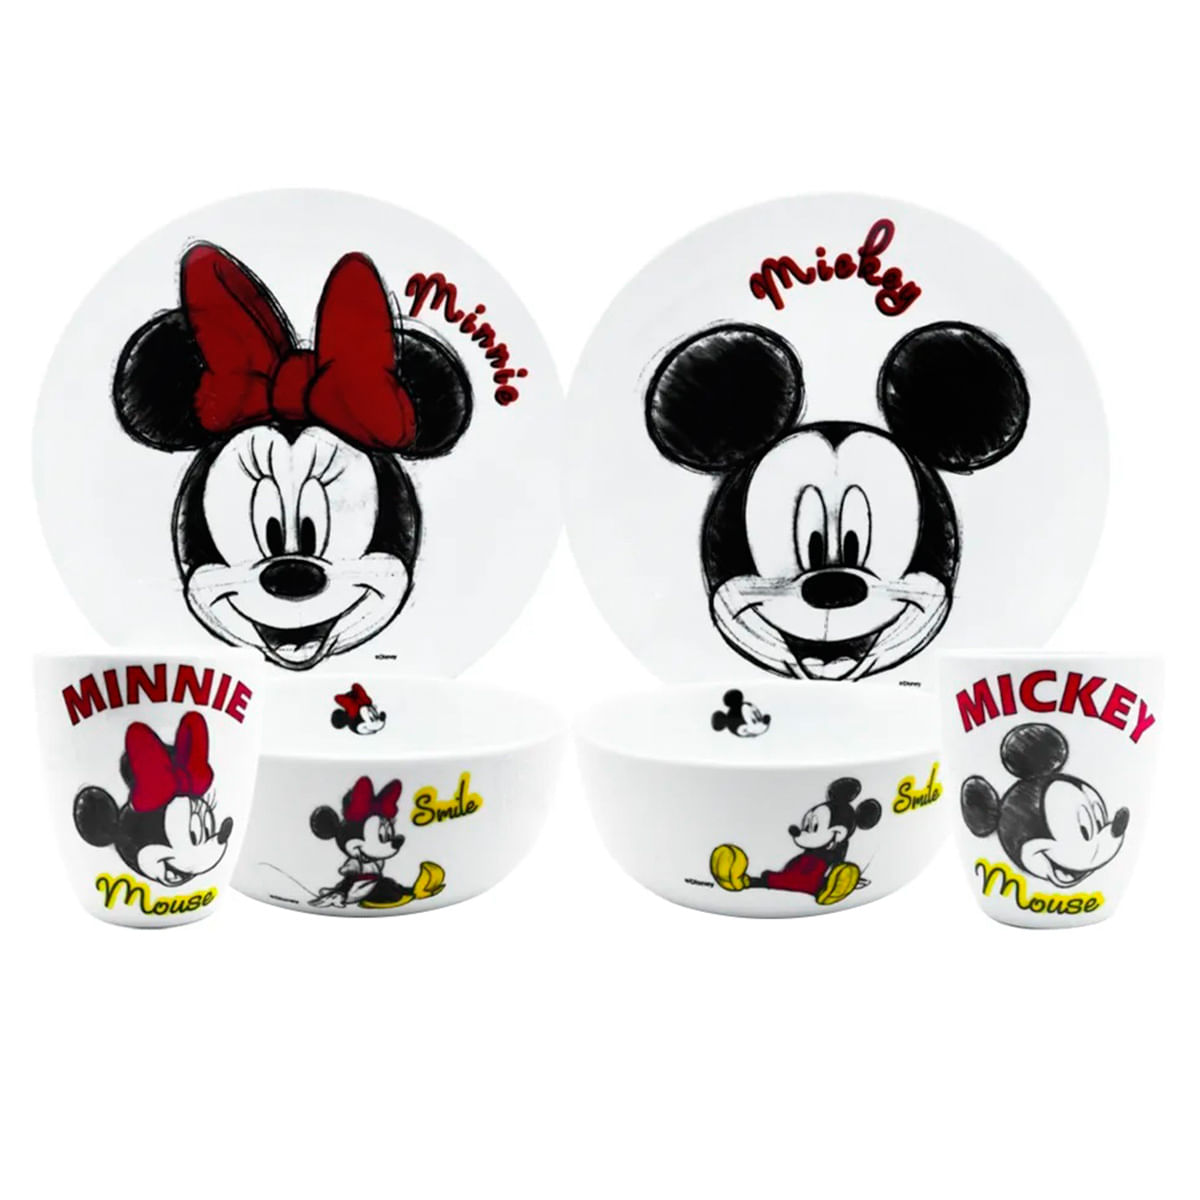 Vandor Disney Mickey and Minnie Mouse 14-Inch Ceramic Serving Platter 89336 